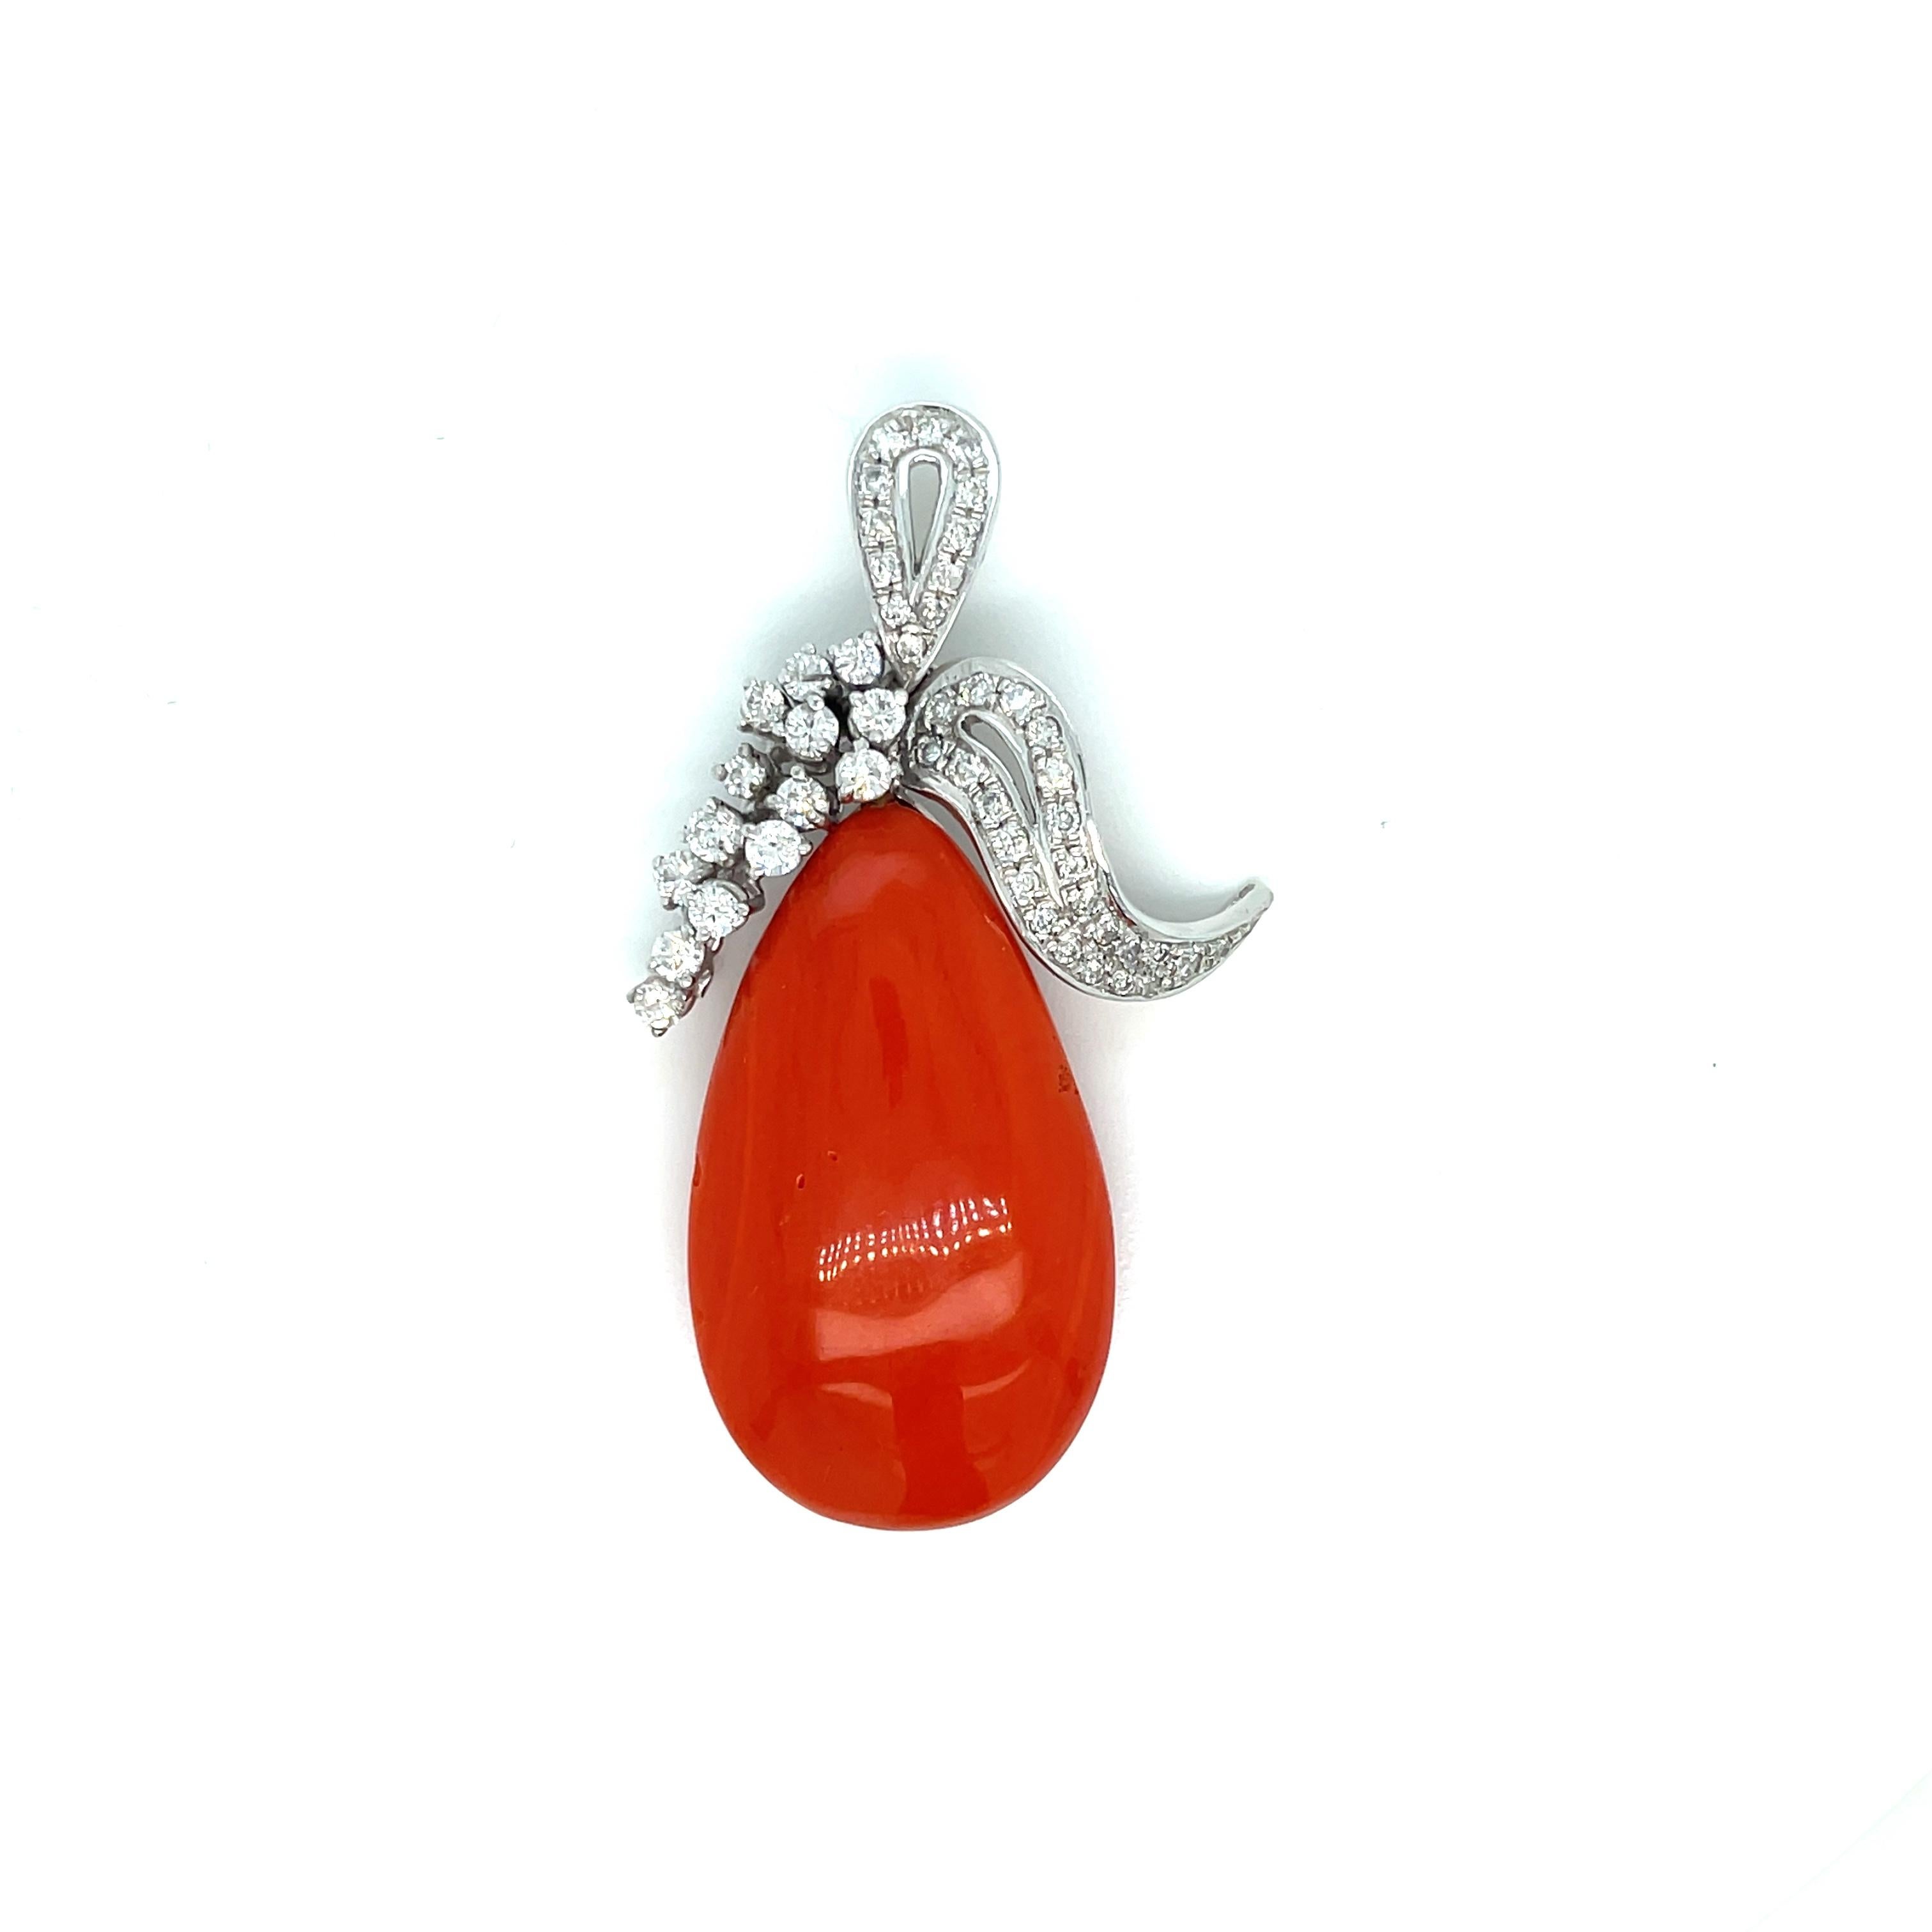 A stunning pendant featuring a natural pear shaped Mediterranean Coral, Sardinian variety, set with 0,50 ct. of round brilliant cut diamonds G color Vvs.
Exclusively hand crafted by great Italian masters craftsman from 18k. Circa 1980

CONDITION: